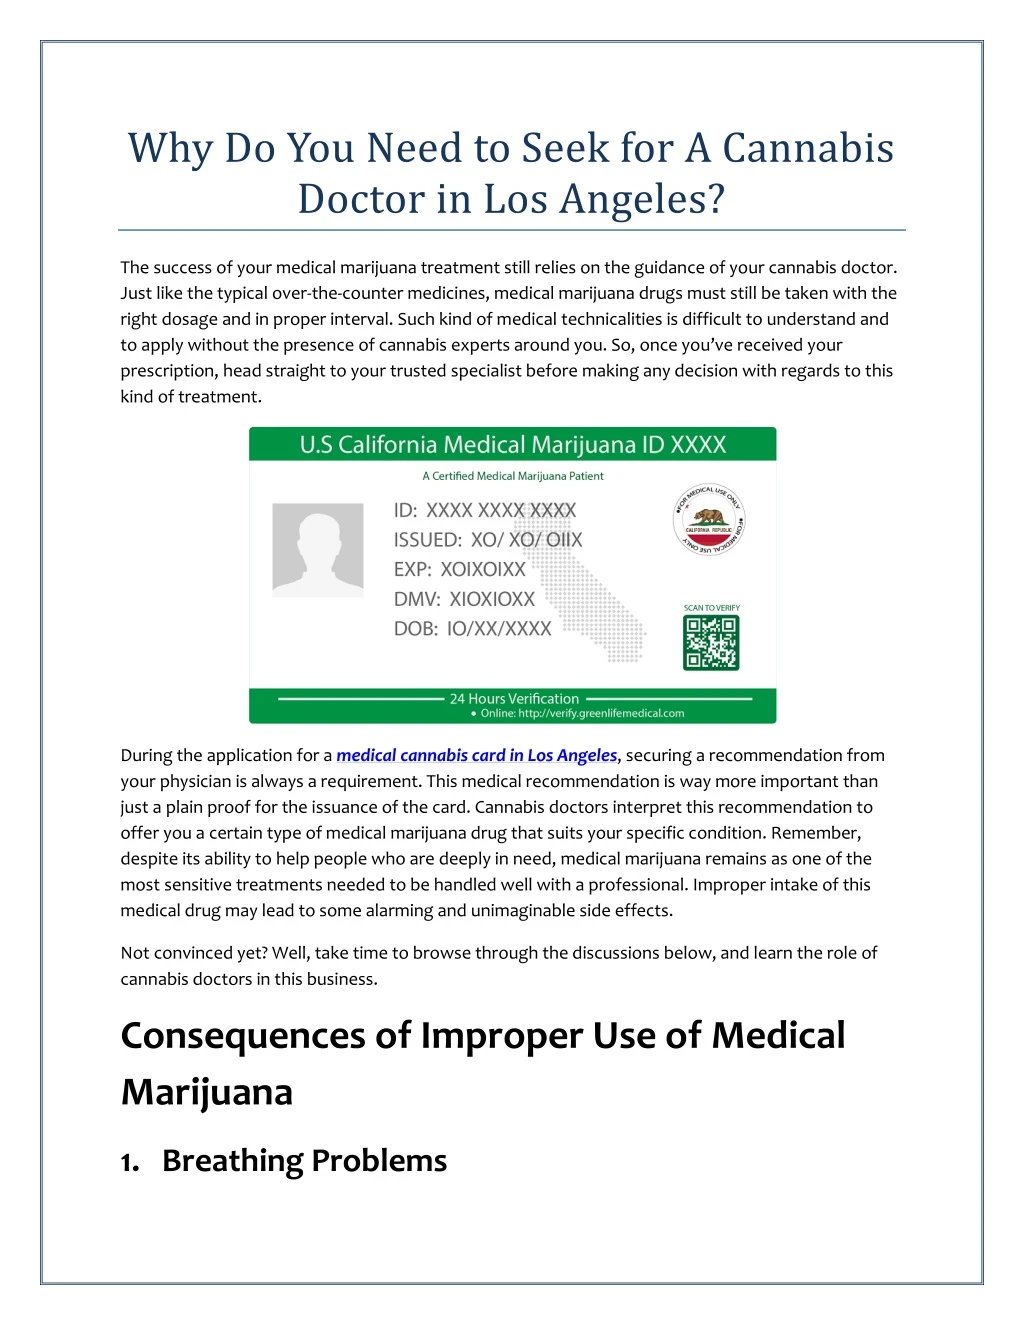 why do you need to seek for a cannabis doctor